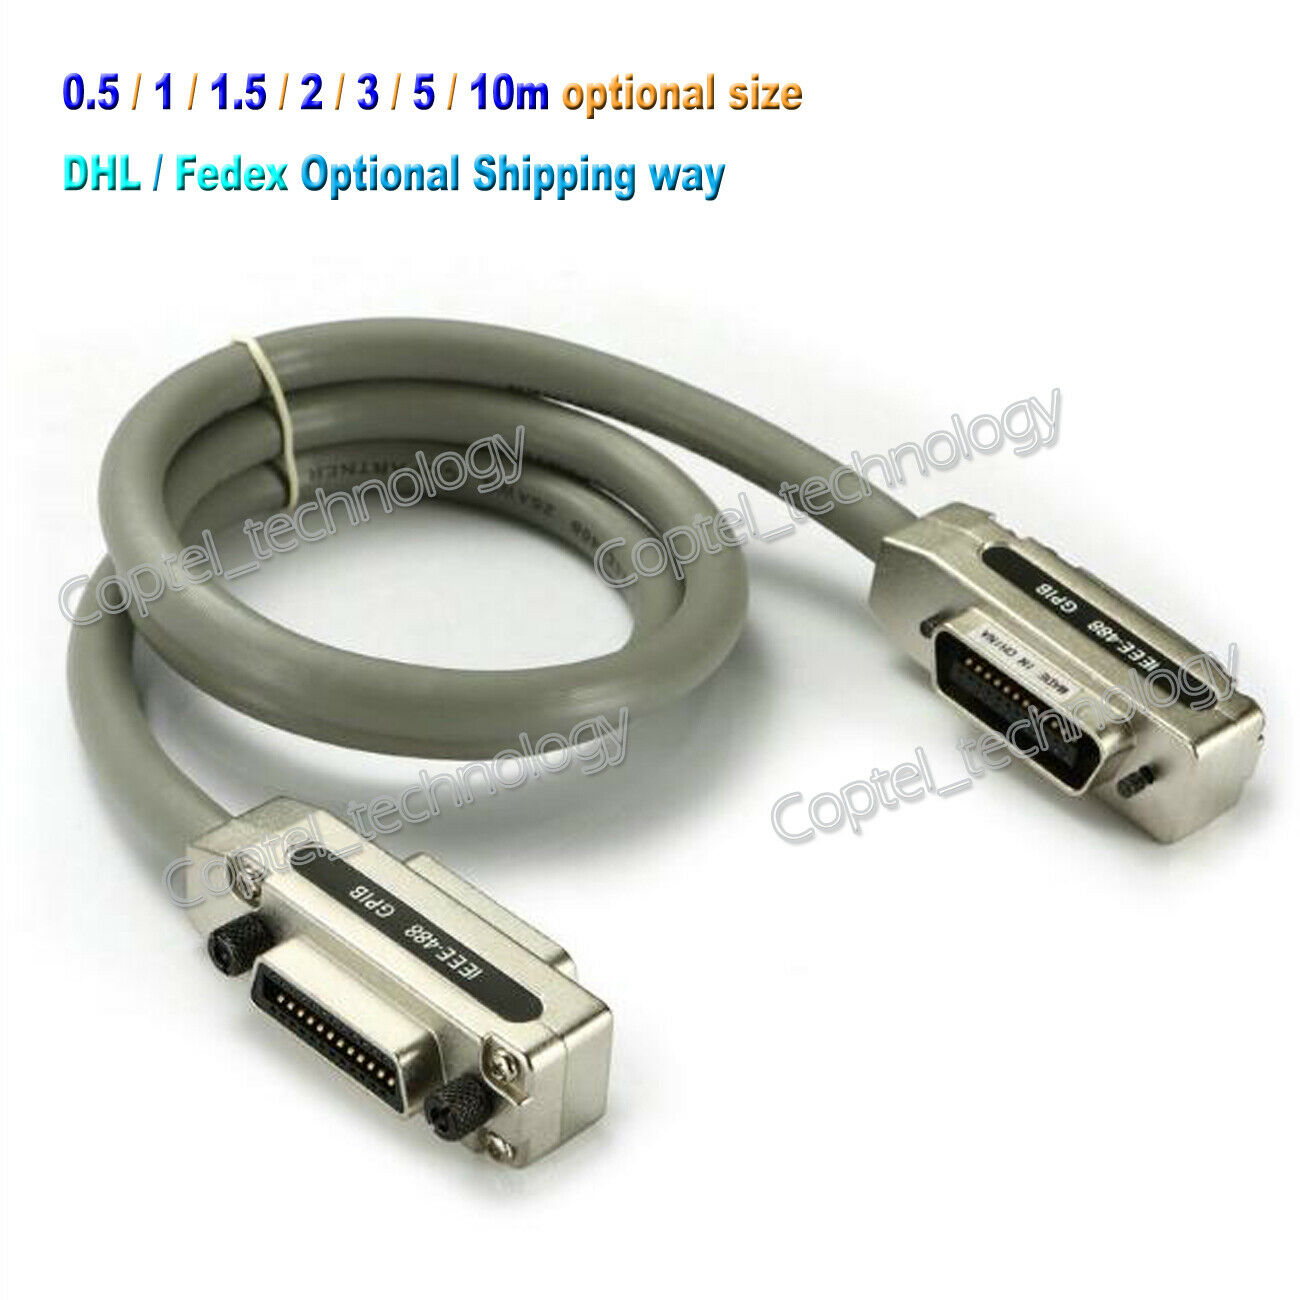 Ieee-488 Cable Gpib Cable Metal Connector Adapter Plug And Play 1-year Warranty